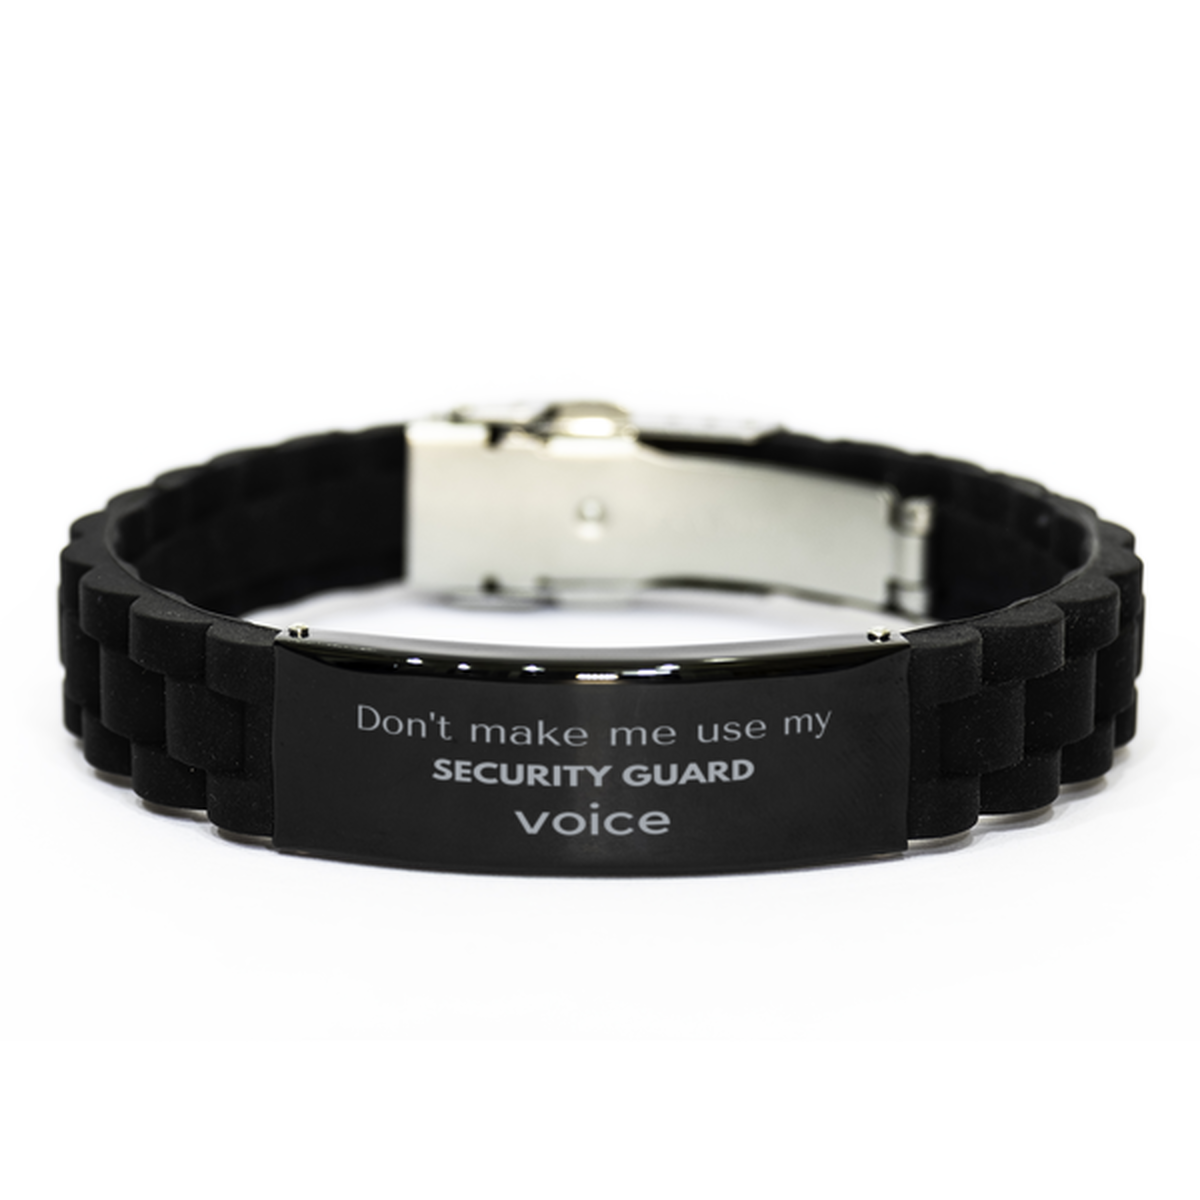 Don't make me use my Security Guard voice, Sarcasm Security Guard Gifts, Christmas Security Guard Black Glidelock Clasp Bracelet Birthday Unique Gifts For Security Guard Coworkers, Men, Women, Colleague, Friends